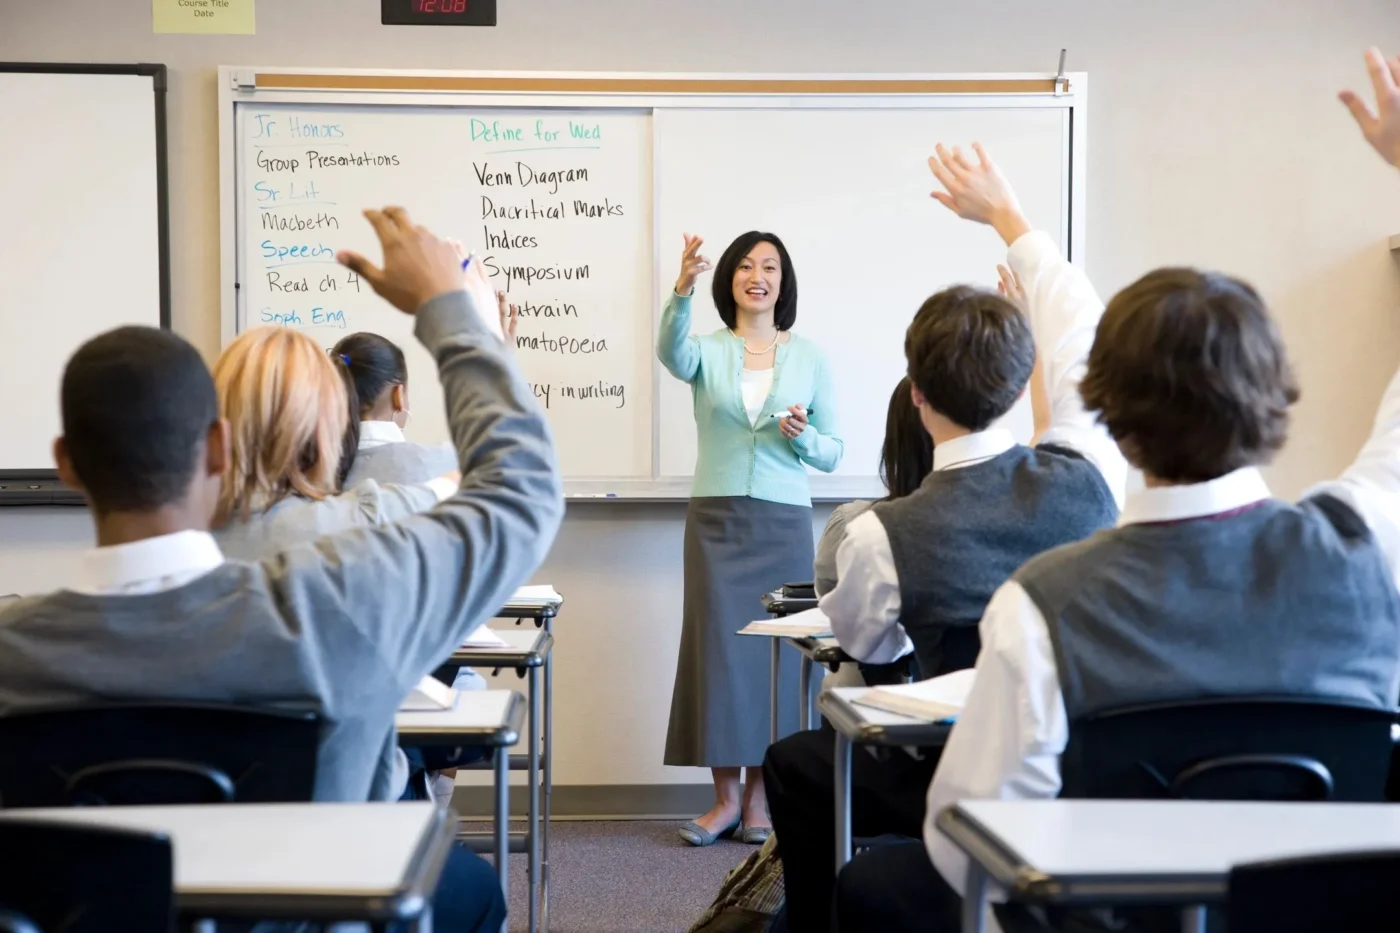 A woman standing in front of a class with her hands raised.